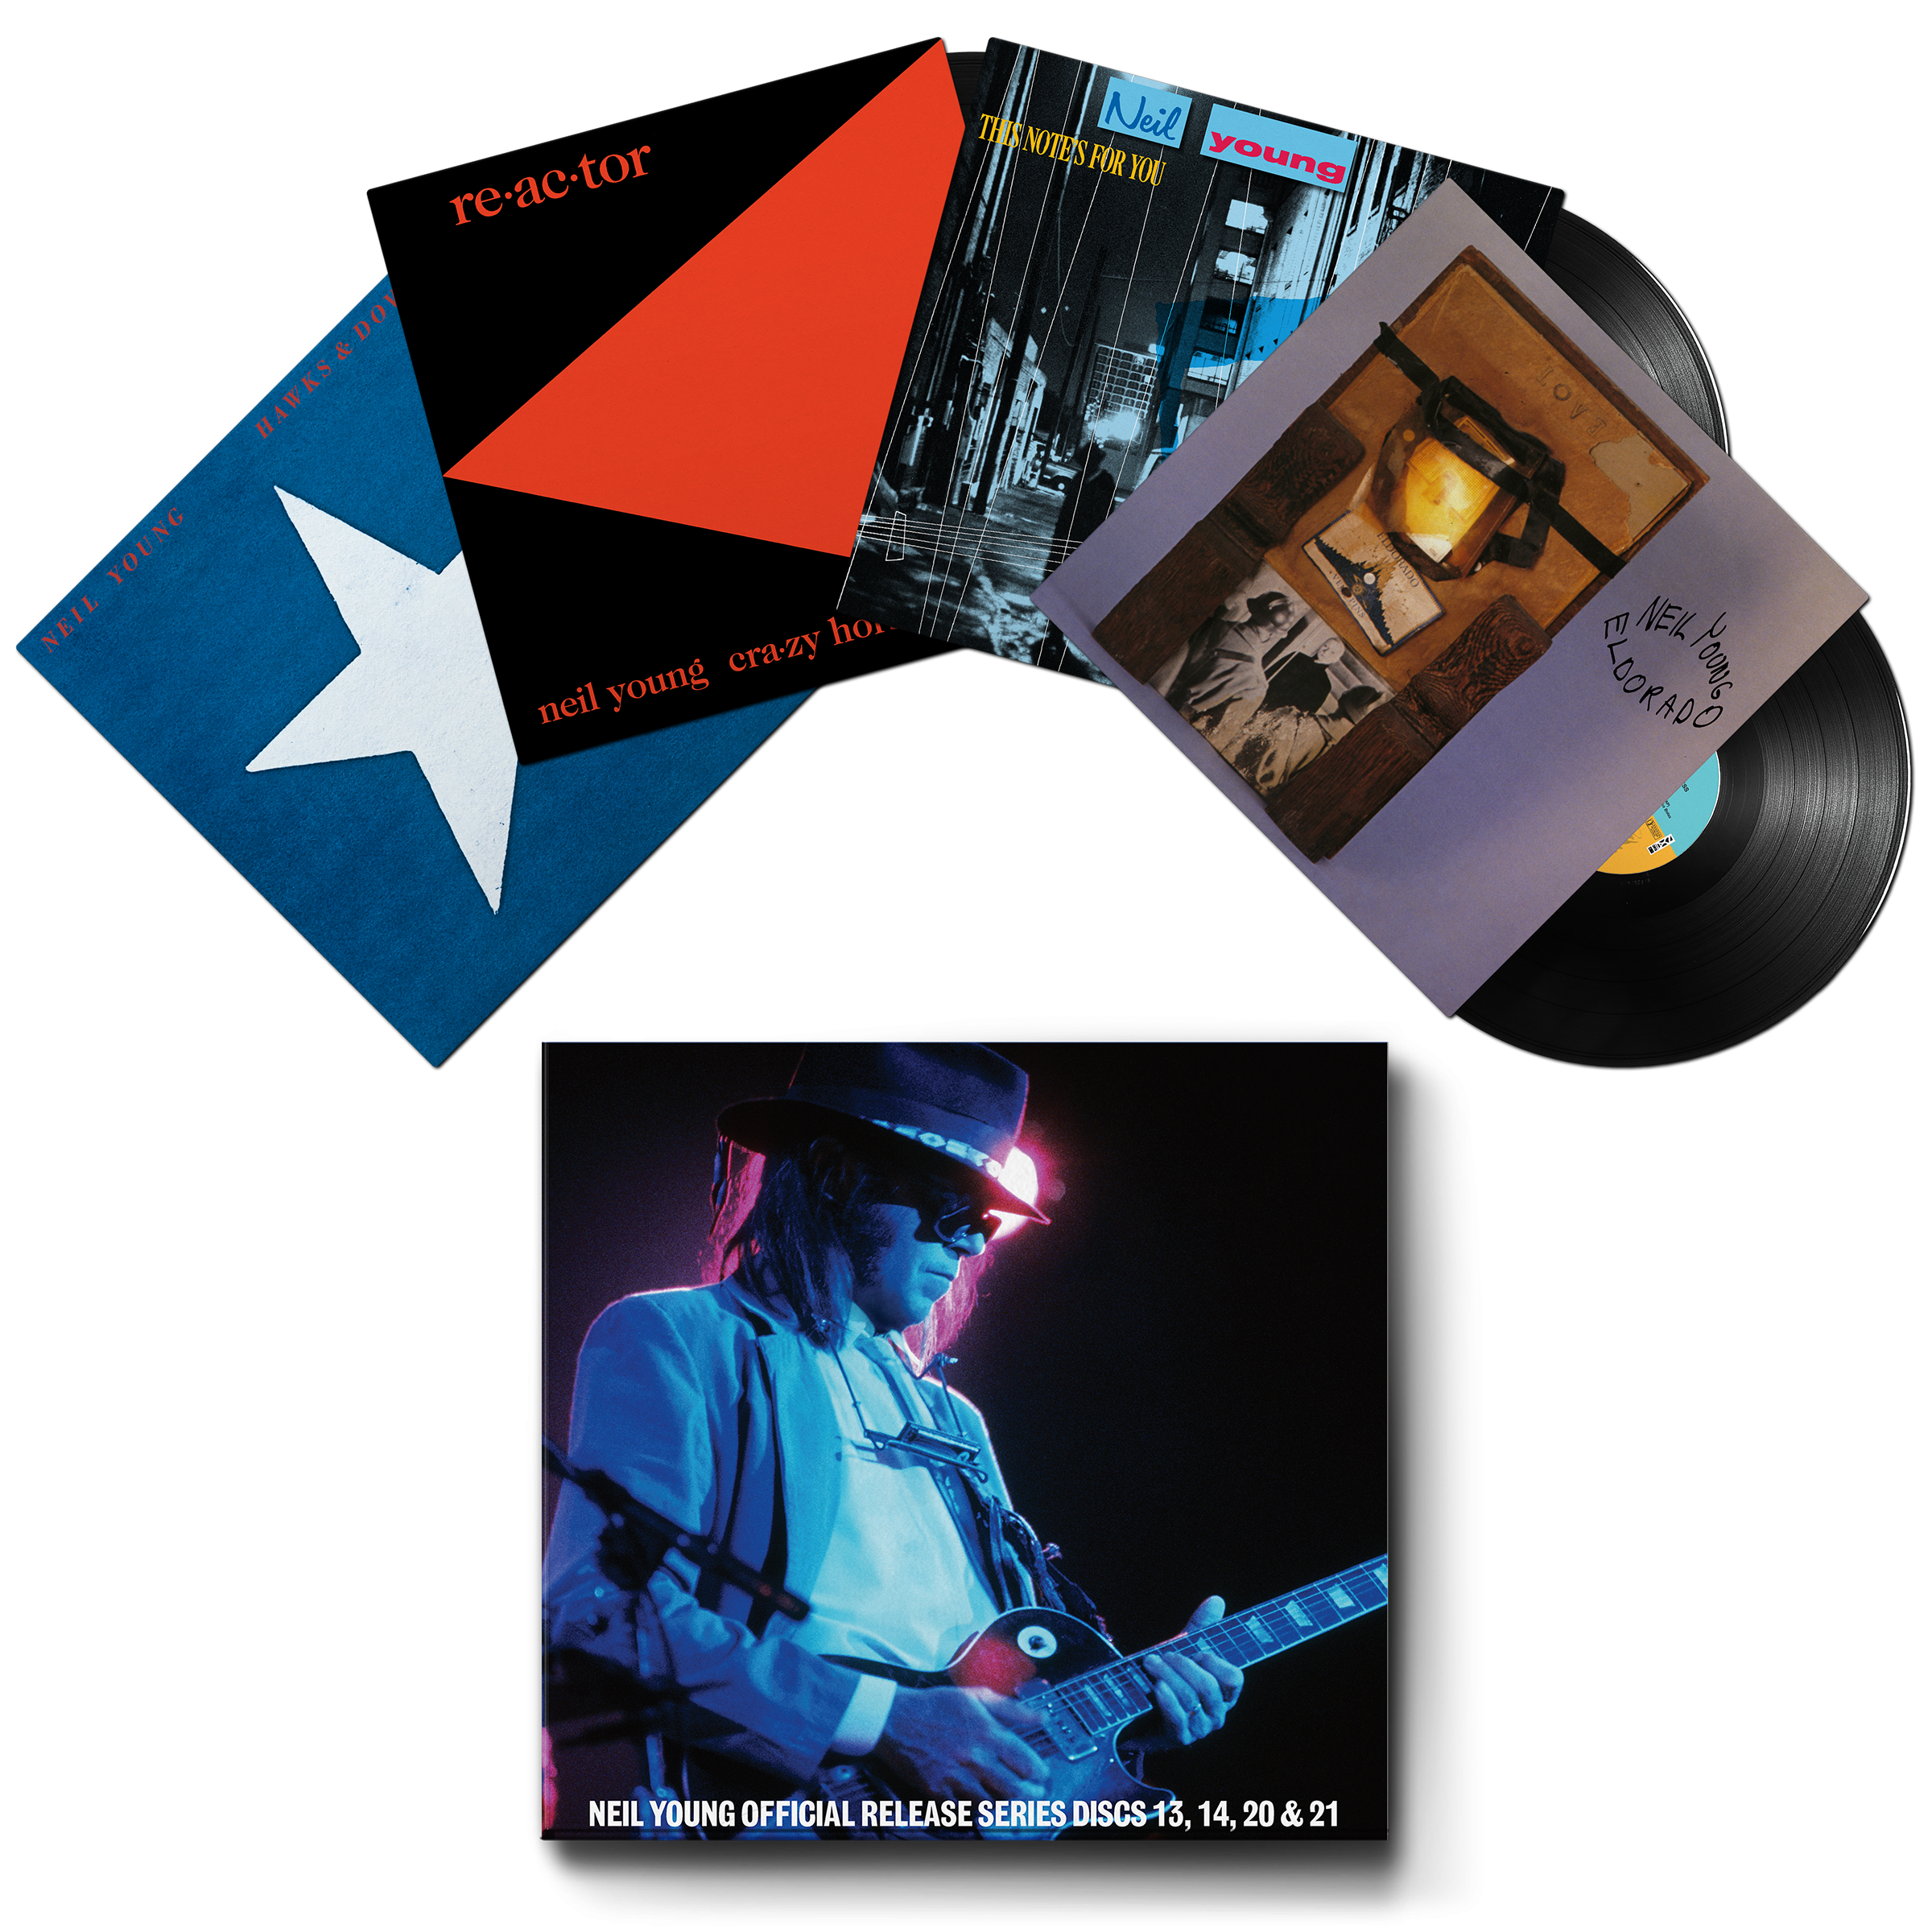 Official Release Series #4 (Vinyl Box Set) | Neil Young US Official Store